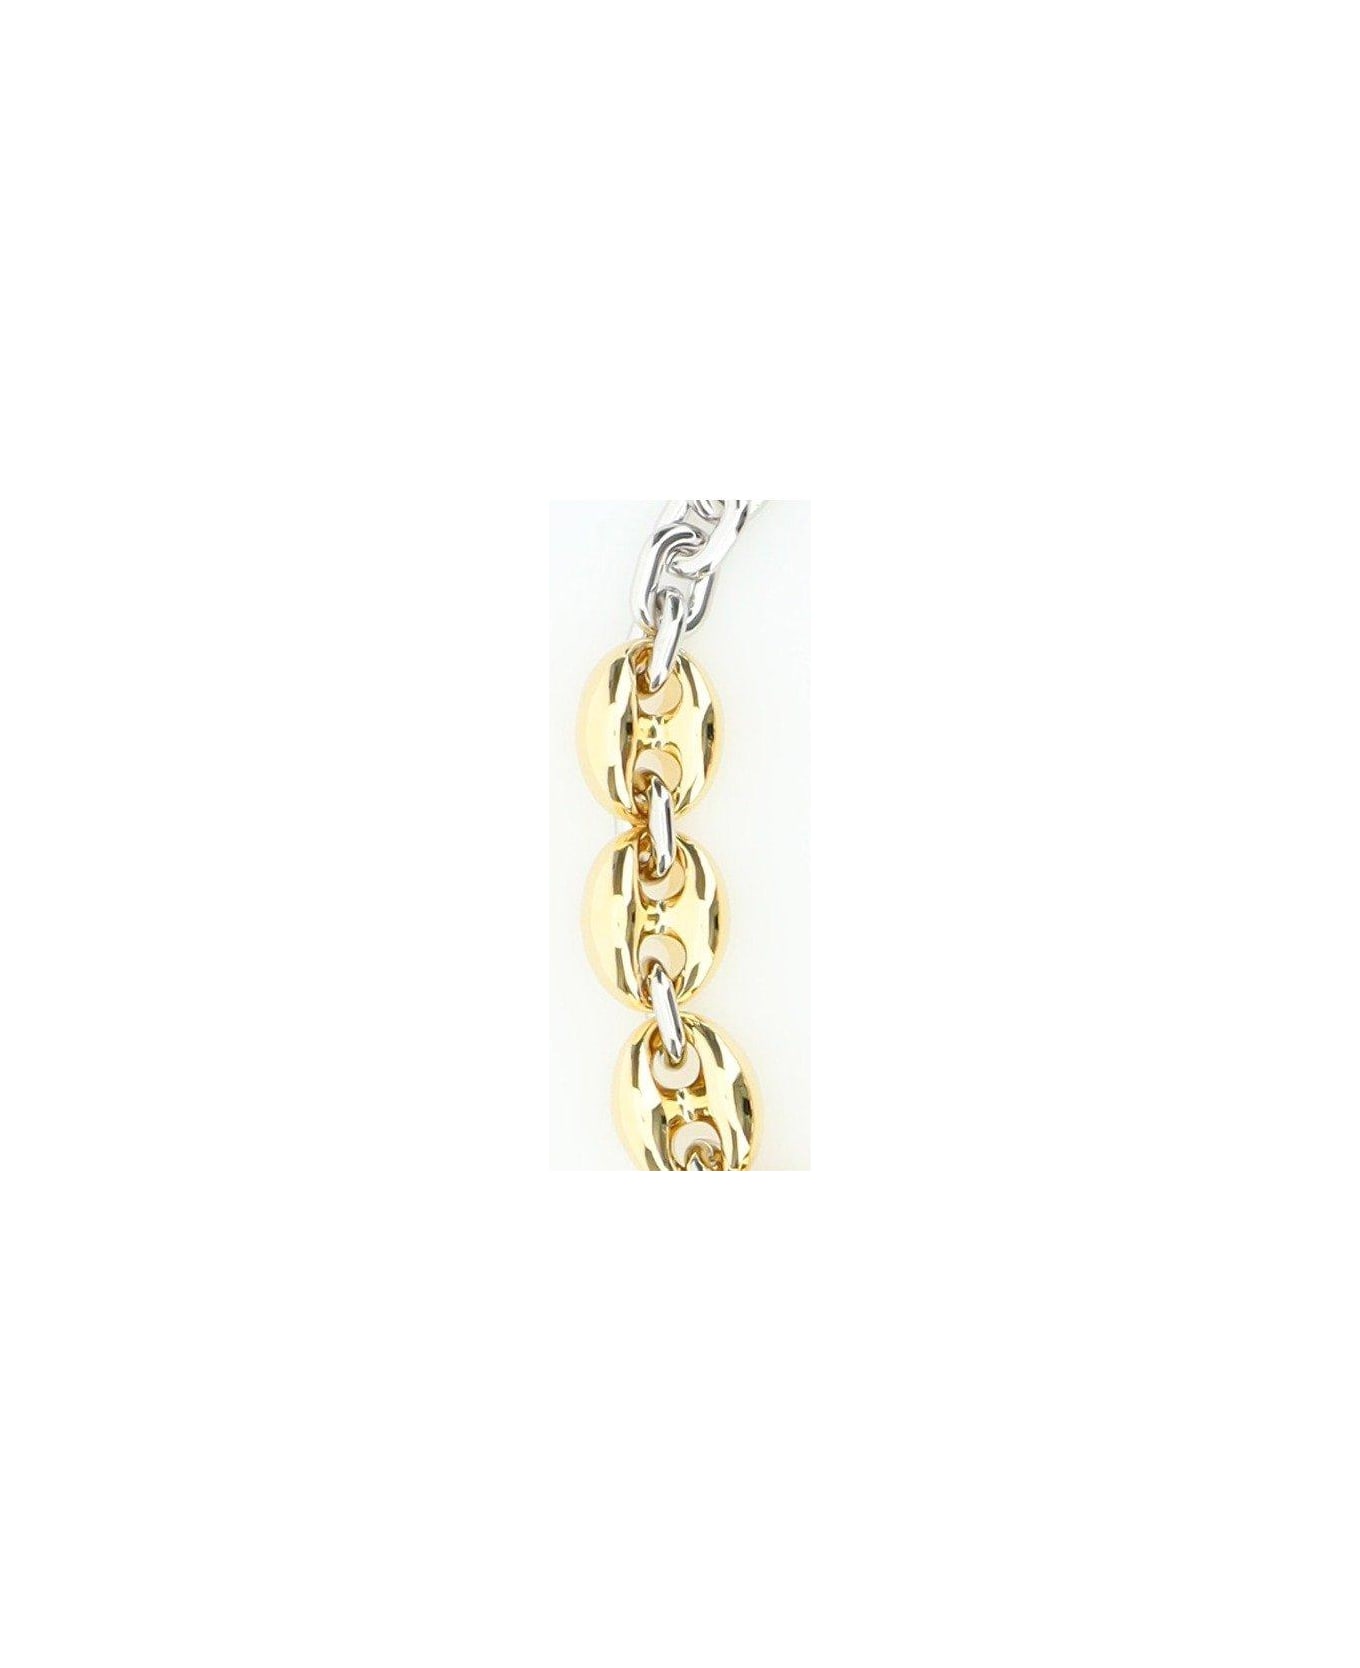 Paco Rabanne Two-toned Chain-linked Necklace - GOLD/SILVER ネックレス